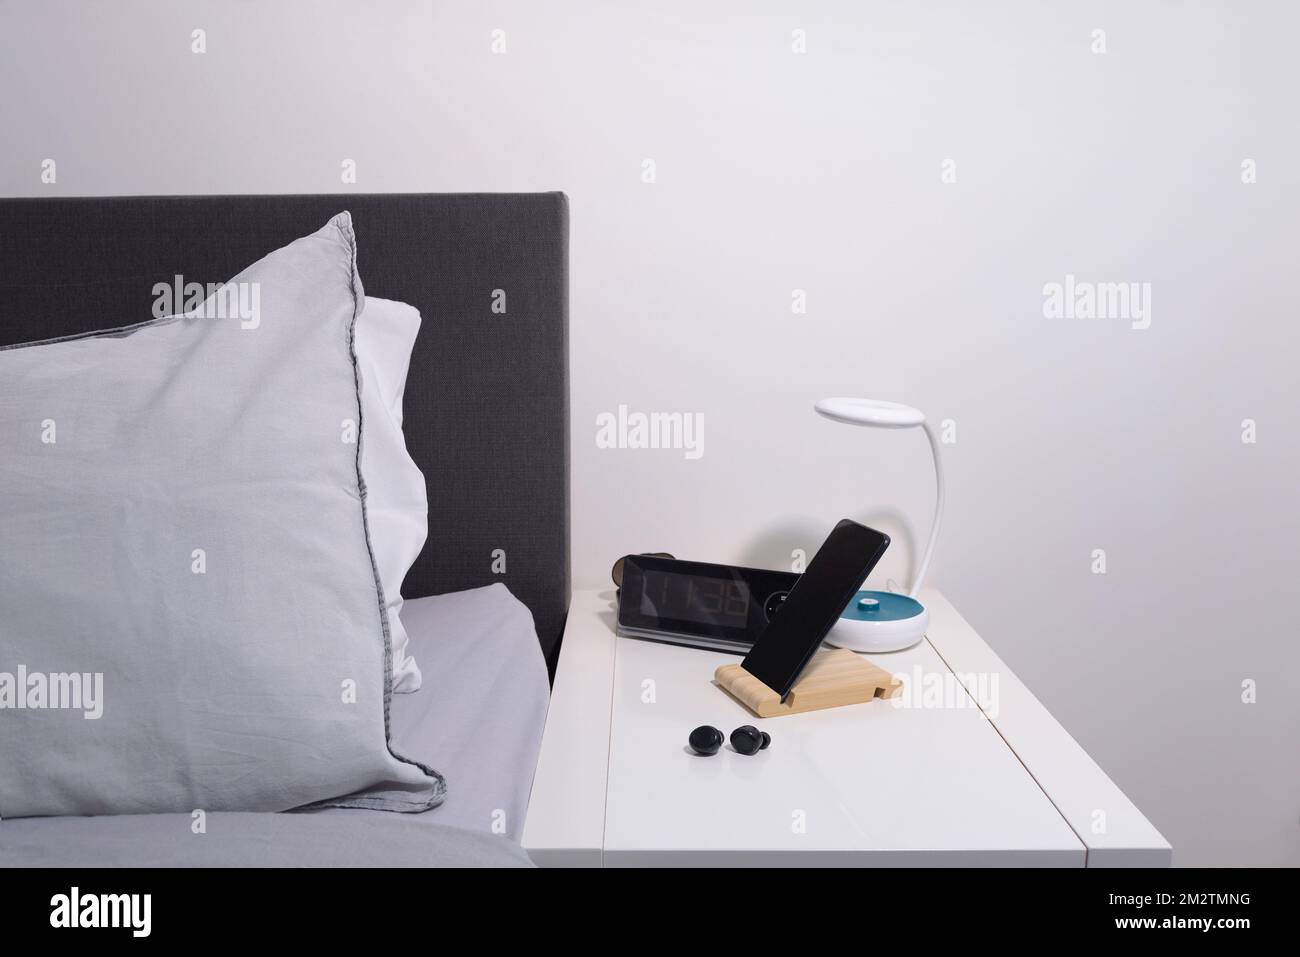 Bedroom actuals. smartphone on the bedside table with lamp, headset, clock and bed. Stock Photo